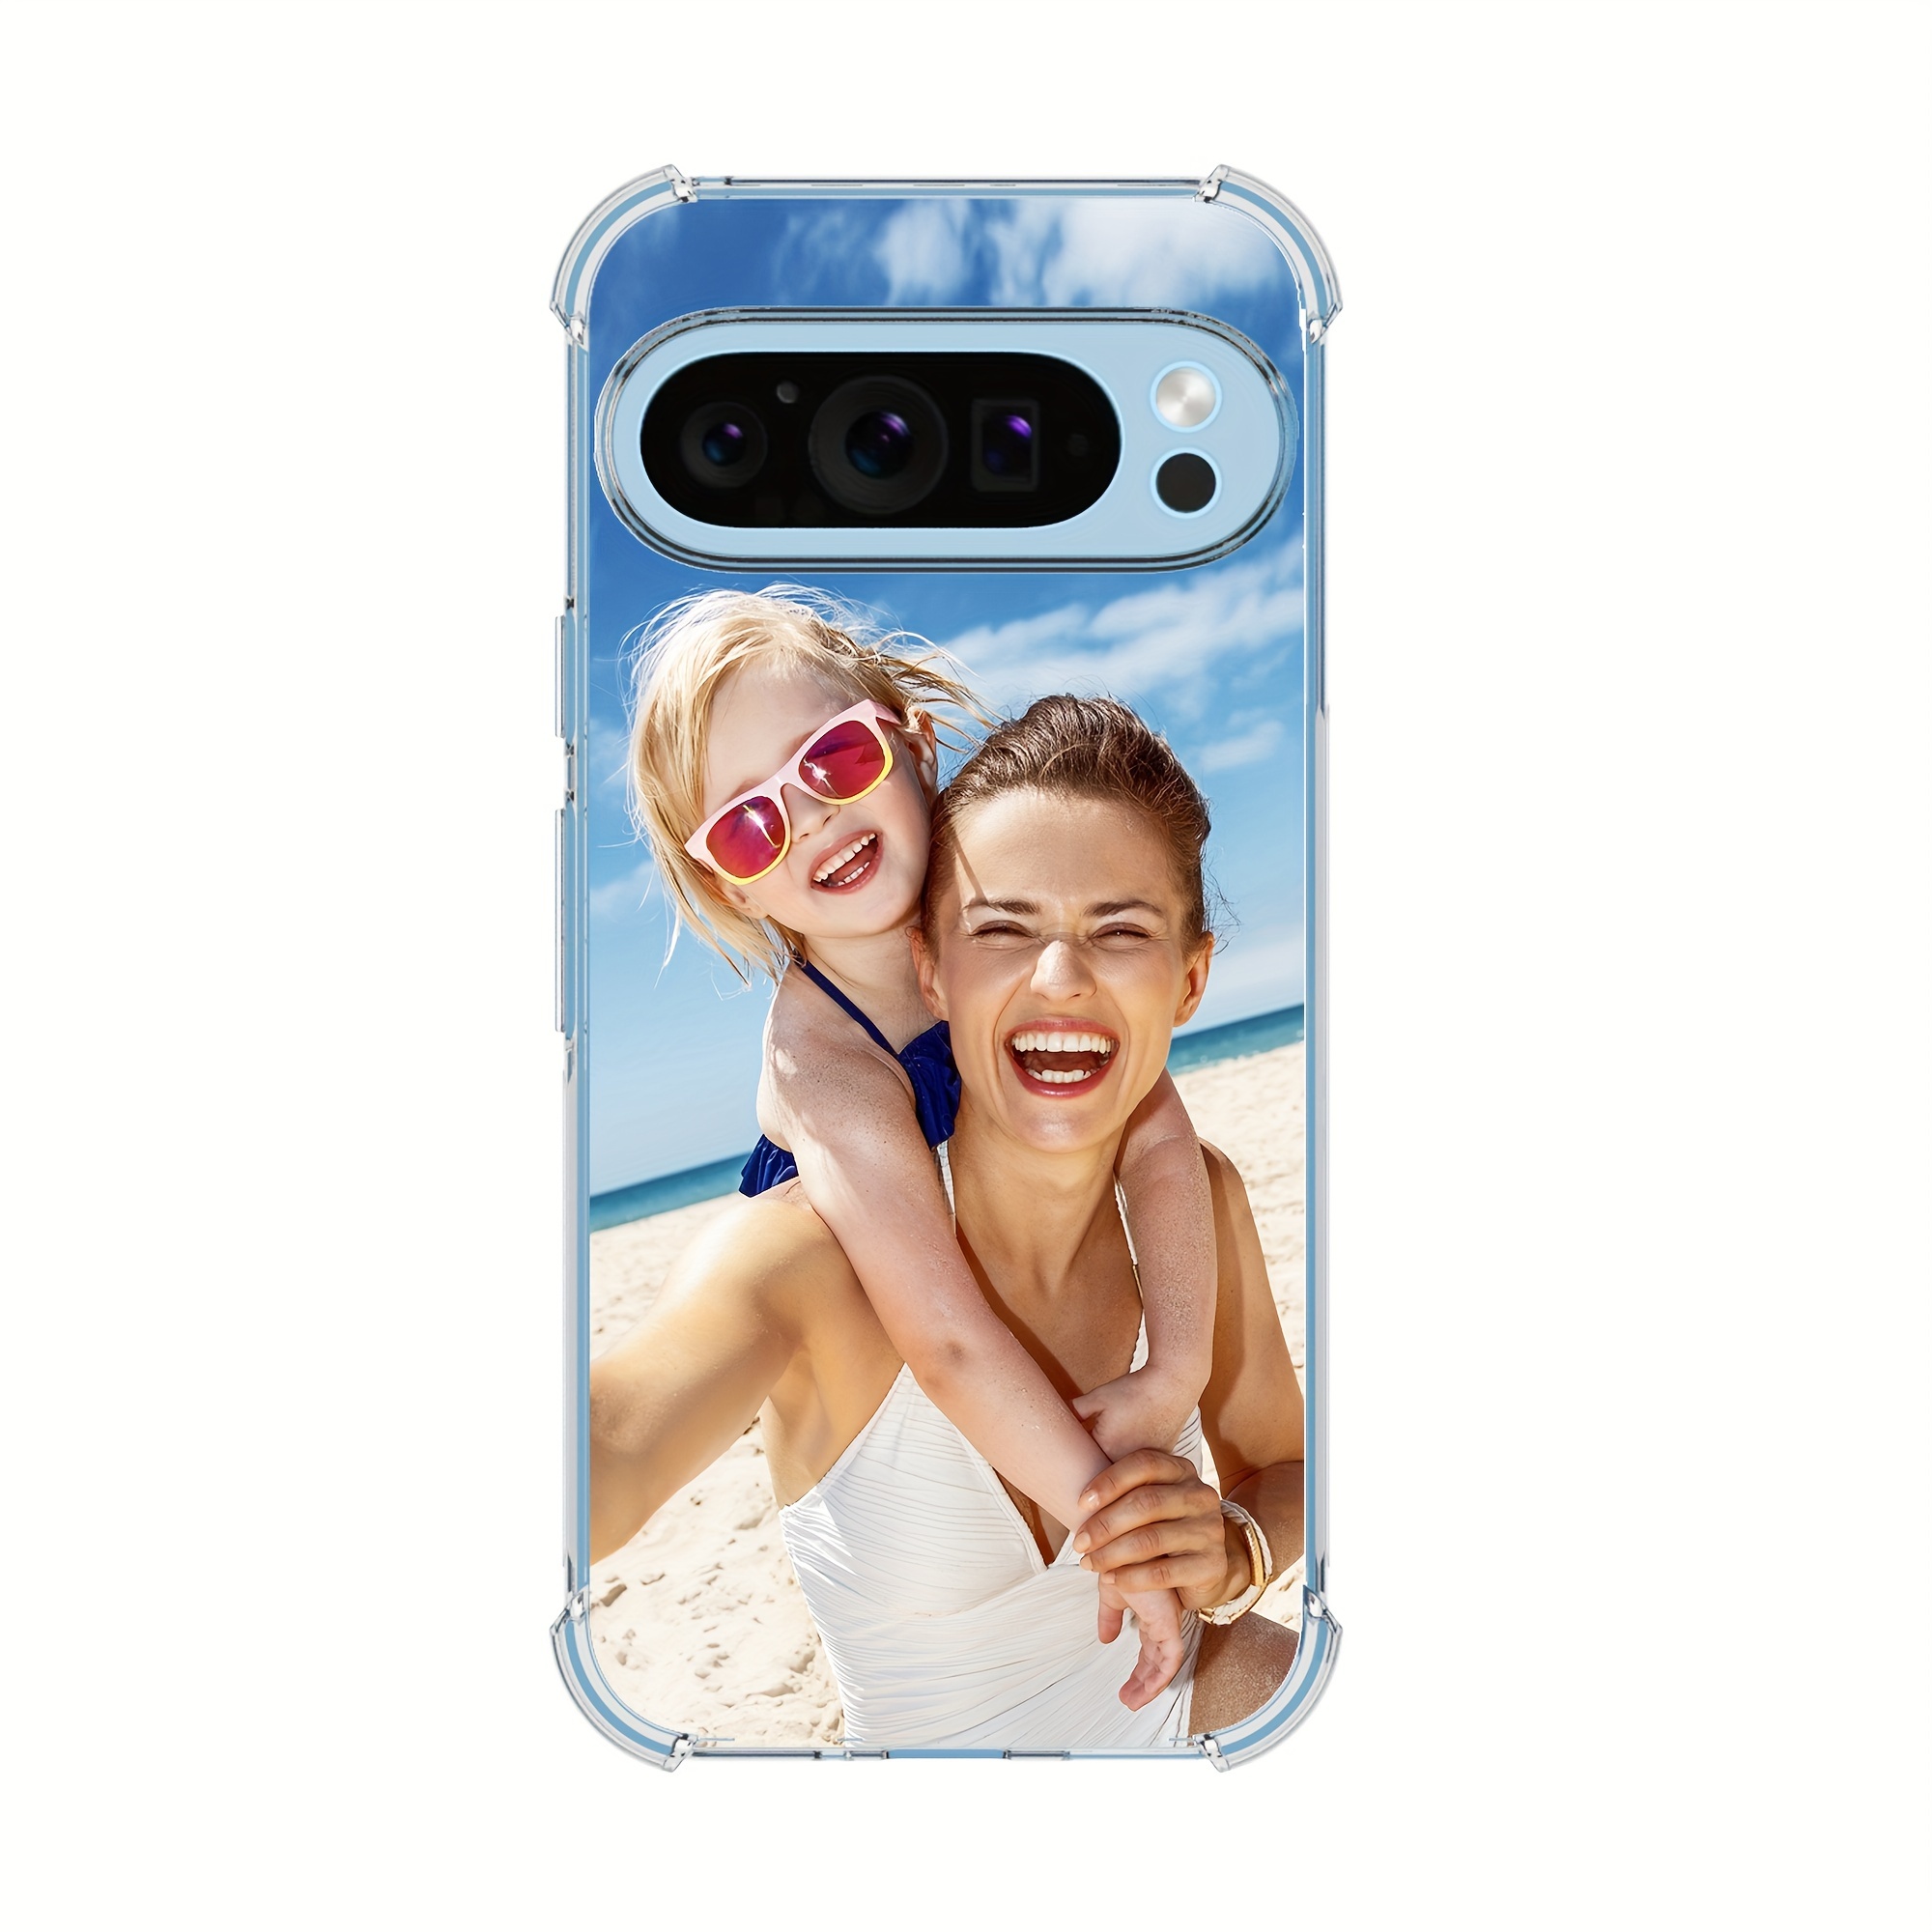 

Customized Photo Design Your Own Personalized Picture Custom Phone Case Cover Compatible With Pixel 9 9pro 8 8a 8pro 7 7a 7pro Pixel 6a Pro 5a 4g 4a 5g 4xl 3a Xl 2 2xl